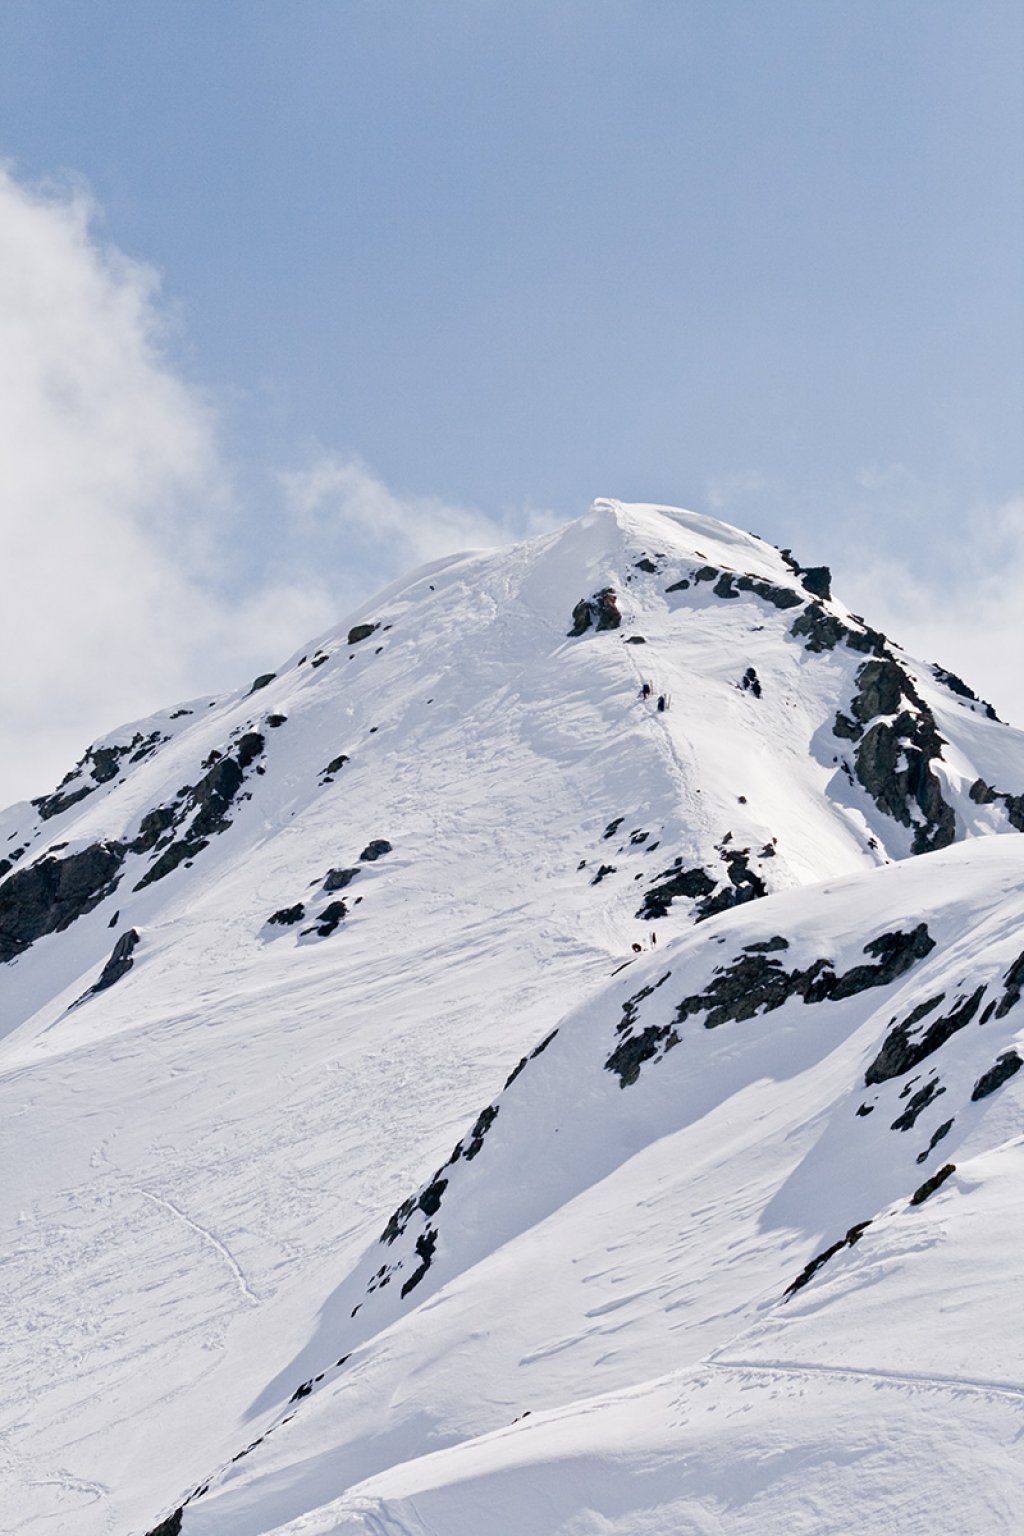 The summit slope of Piz Lunghin